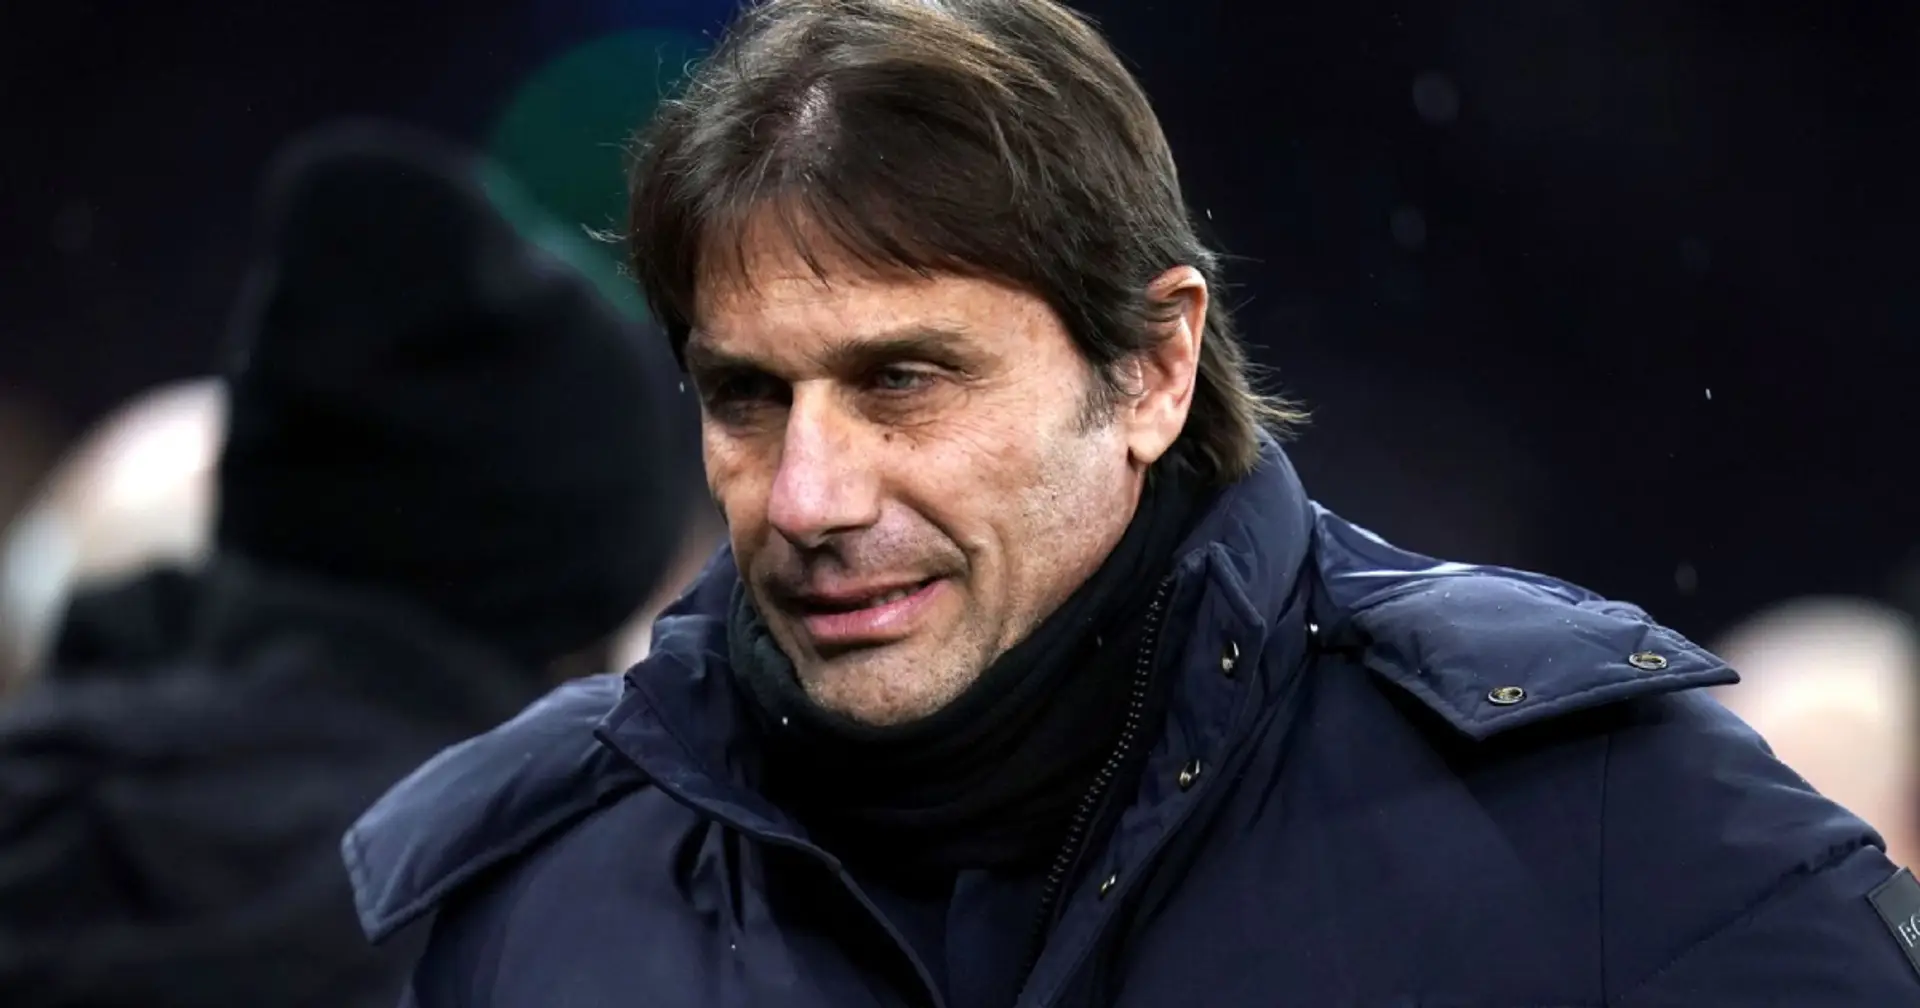 Tottenham to sack Conte & 3 other under-radar stories at Chelsea today